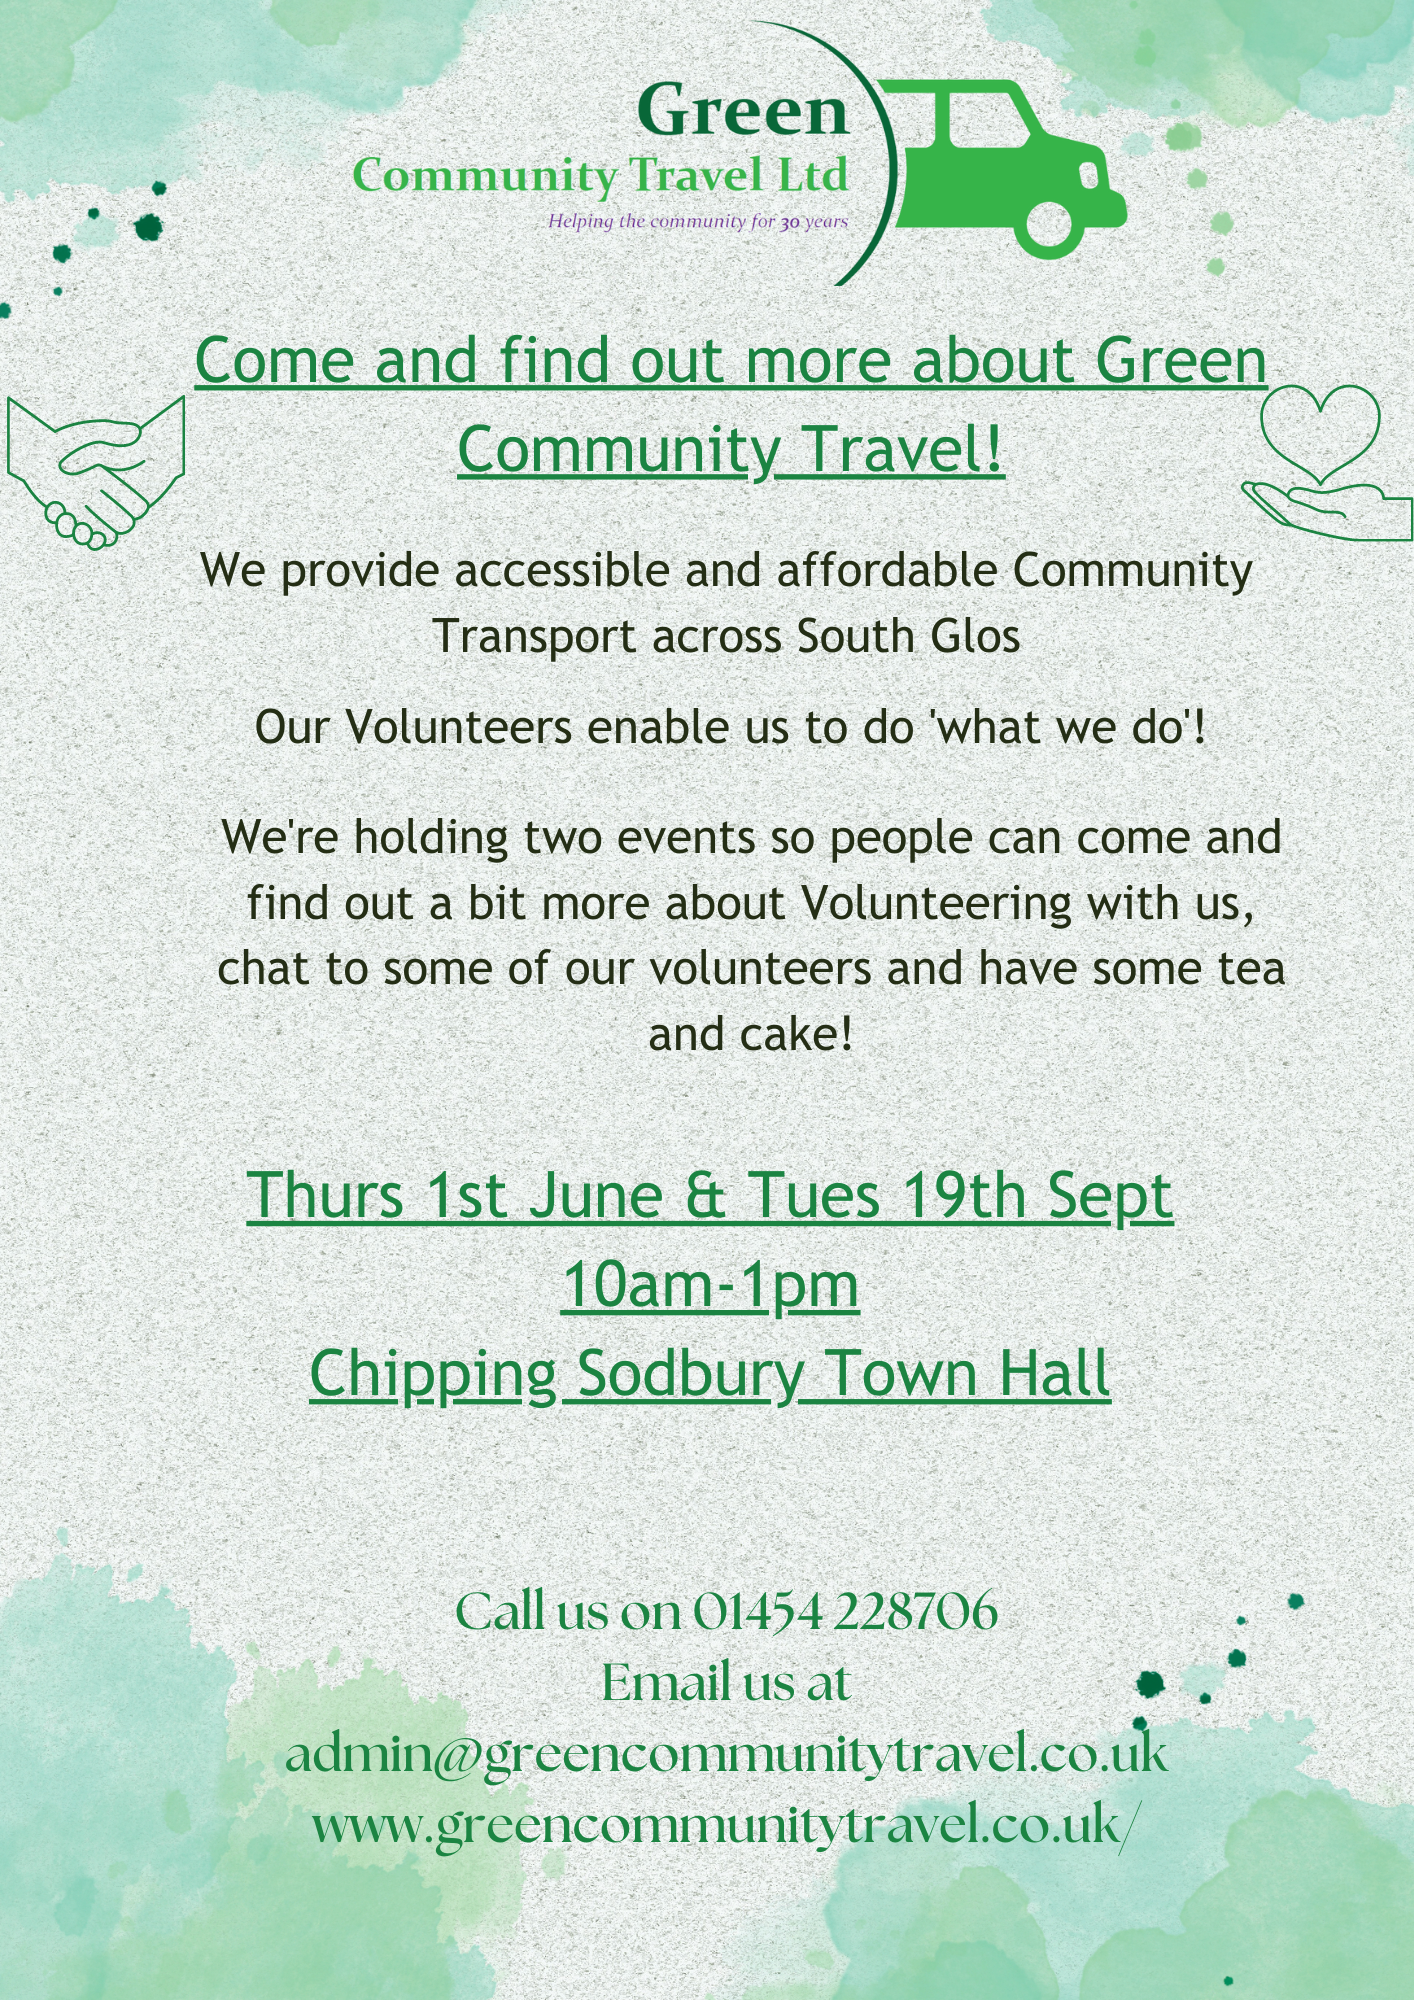 Green Community Travel Ltd. Come and find out more about Green Community Travel! We provide accessible and affordable community transport across South Glos. Our volunteers enable us to do 'what we do'! We're holding two events so people can come and find out a bit more about Volunteering with us, chat to some of our volunteers and have some tea and cake! Thurs 1st June & Tues 19th Sept, 10am-1pm, Chipping Sodbury Town Hall. Call us on 01454228706. Email us at admin@greencommunitytravel.co.uk . www.greencommunitytravel.co.uk